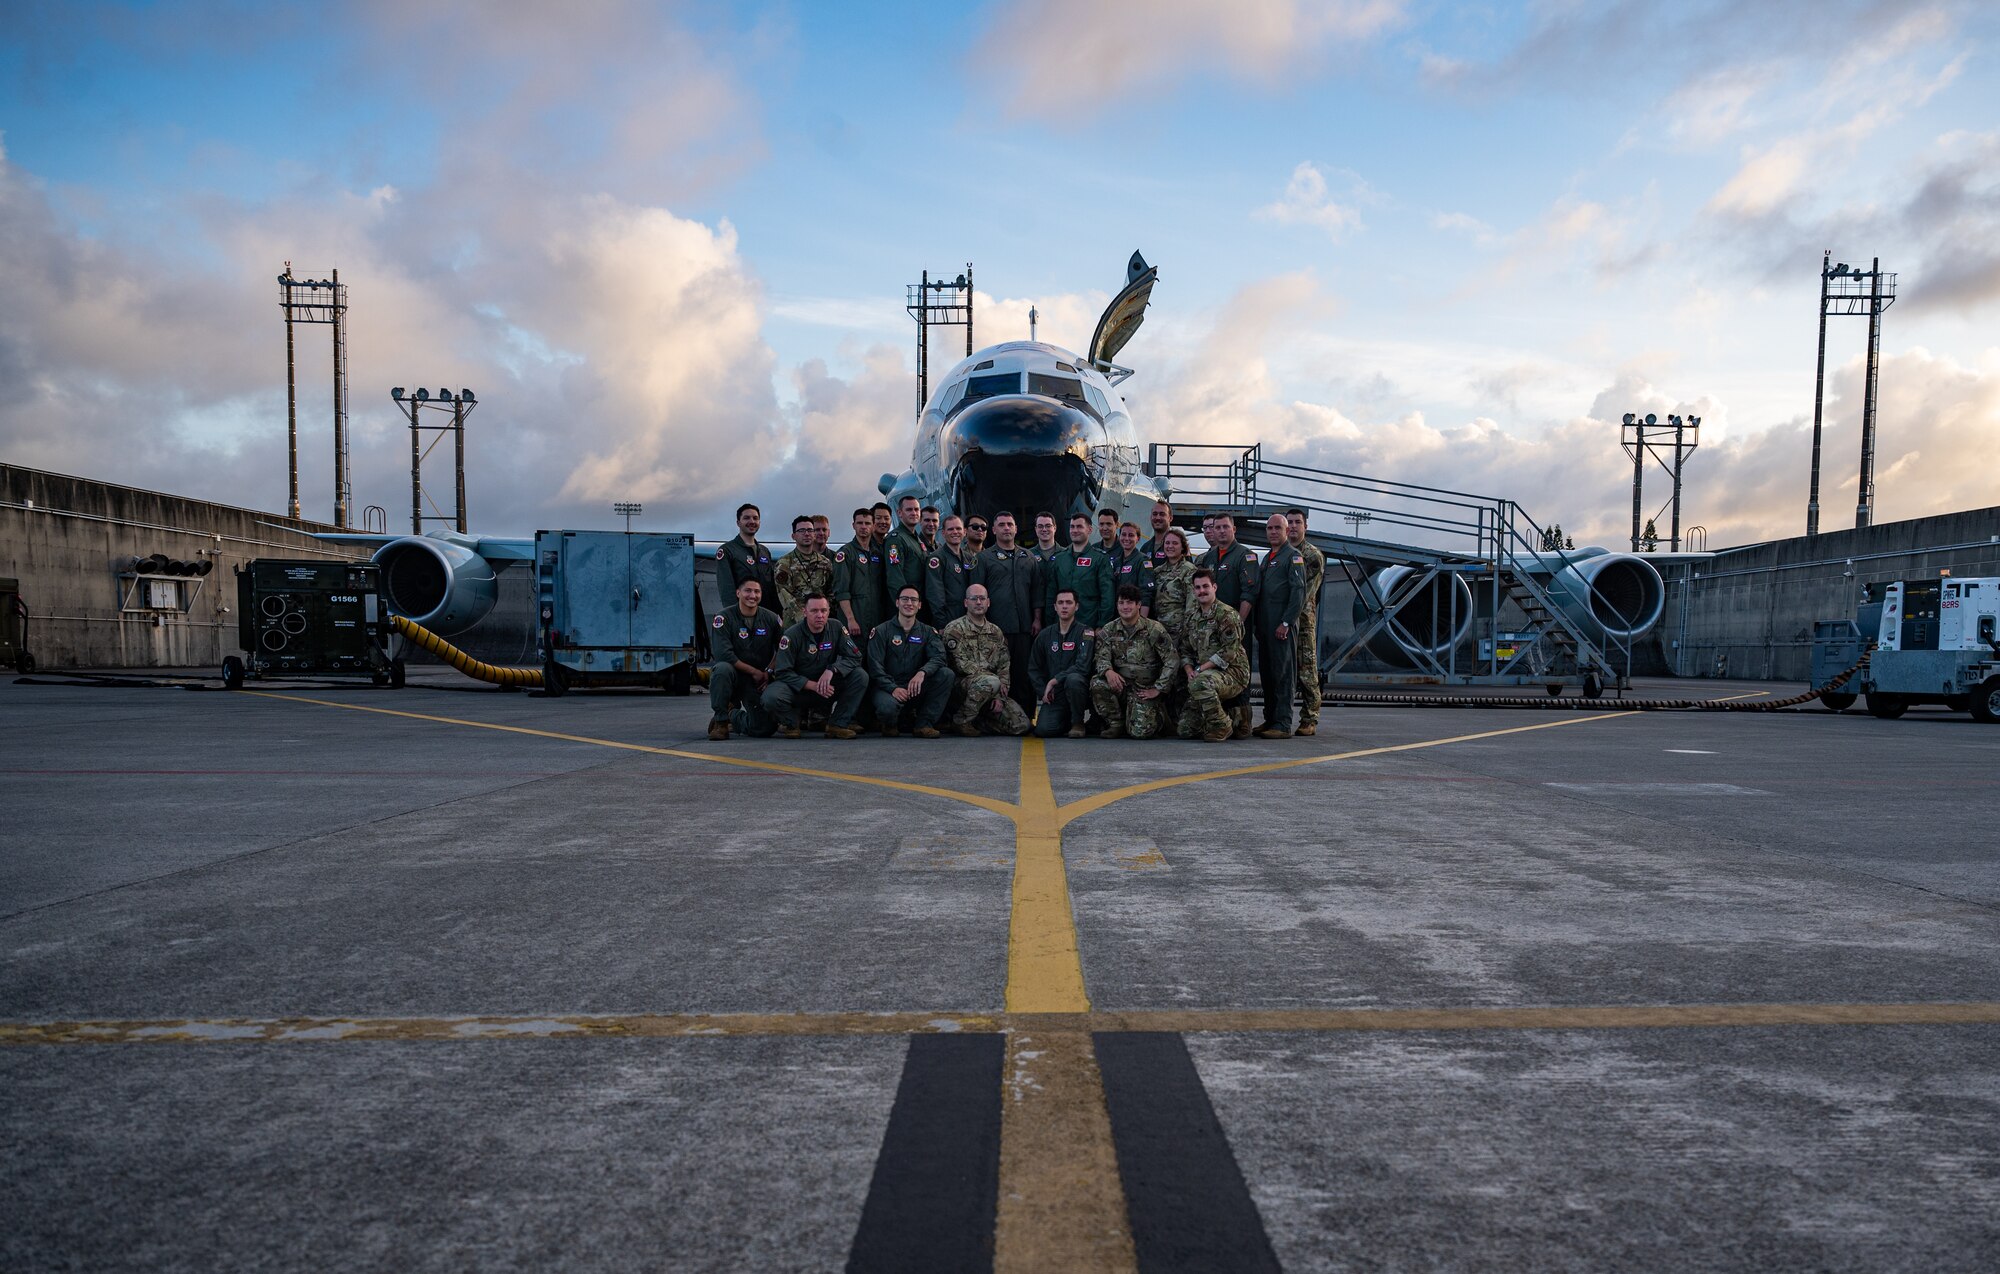 Service members pose in front of an aircraft.